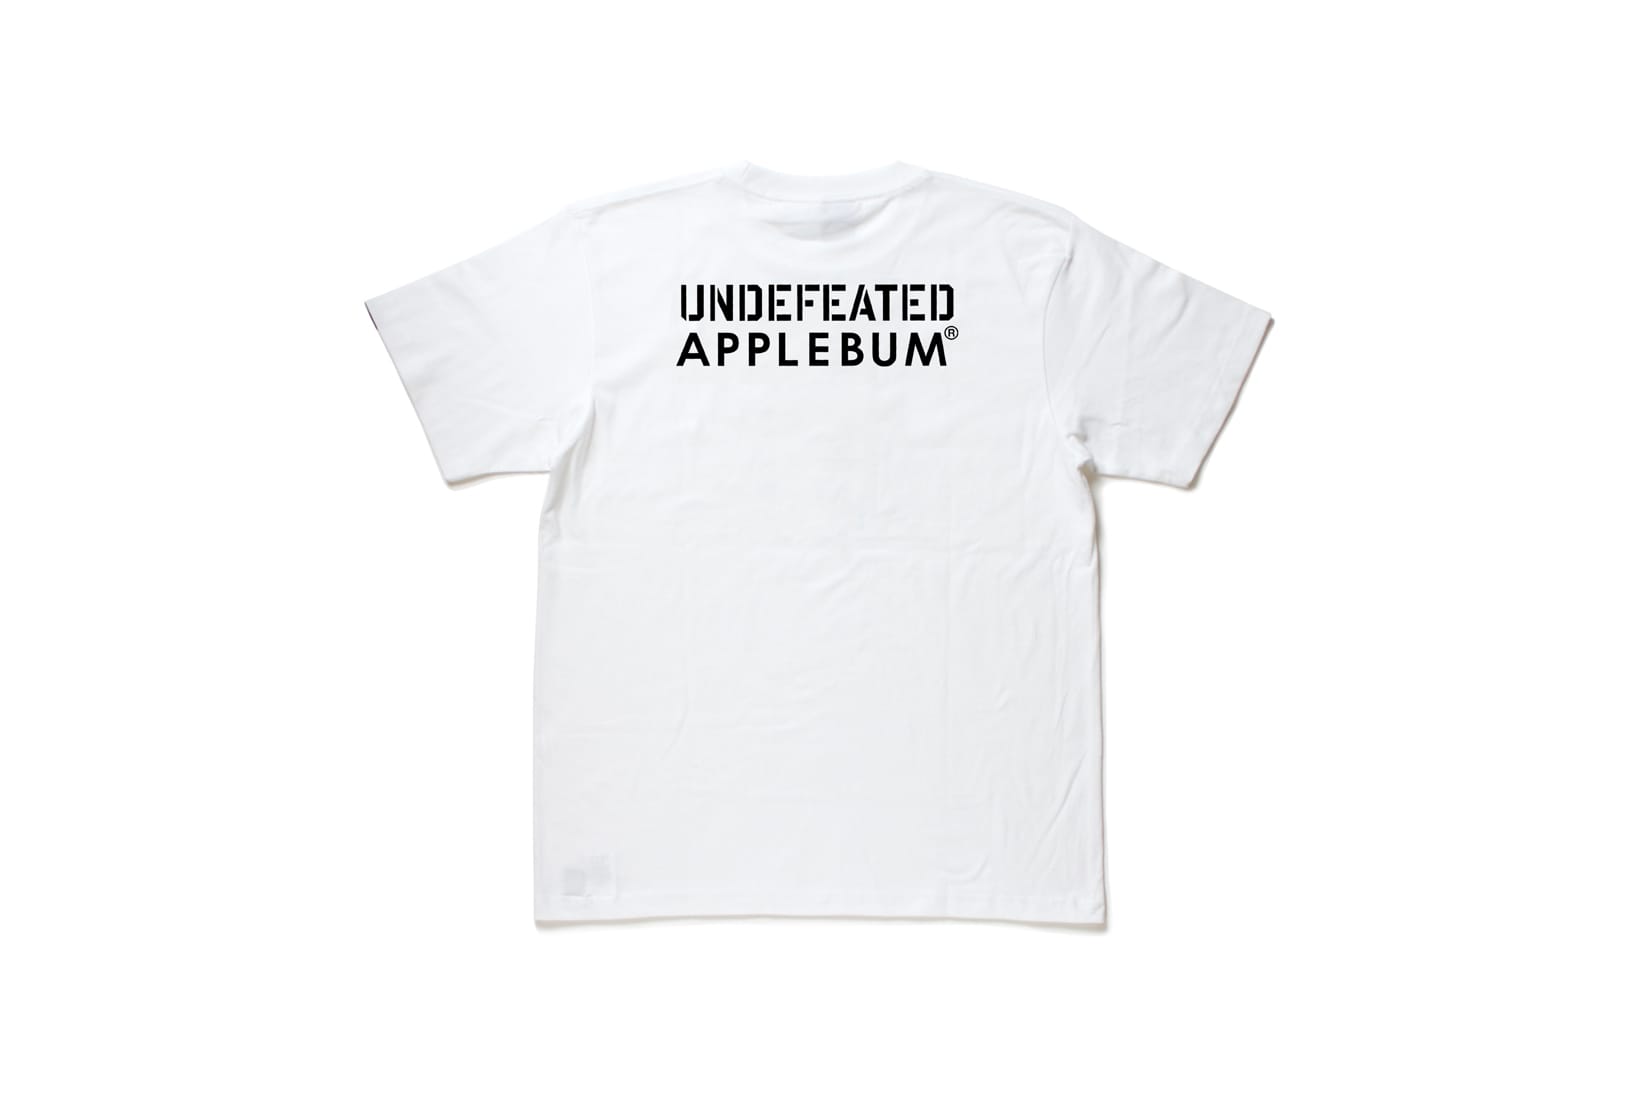 UNDEFEATED & APPLEBUM Team Up For New Collaboration | Hypebeast